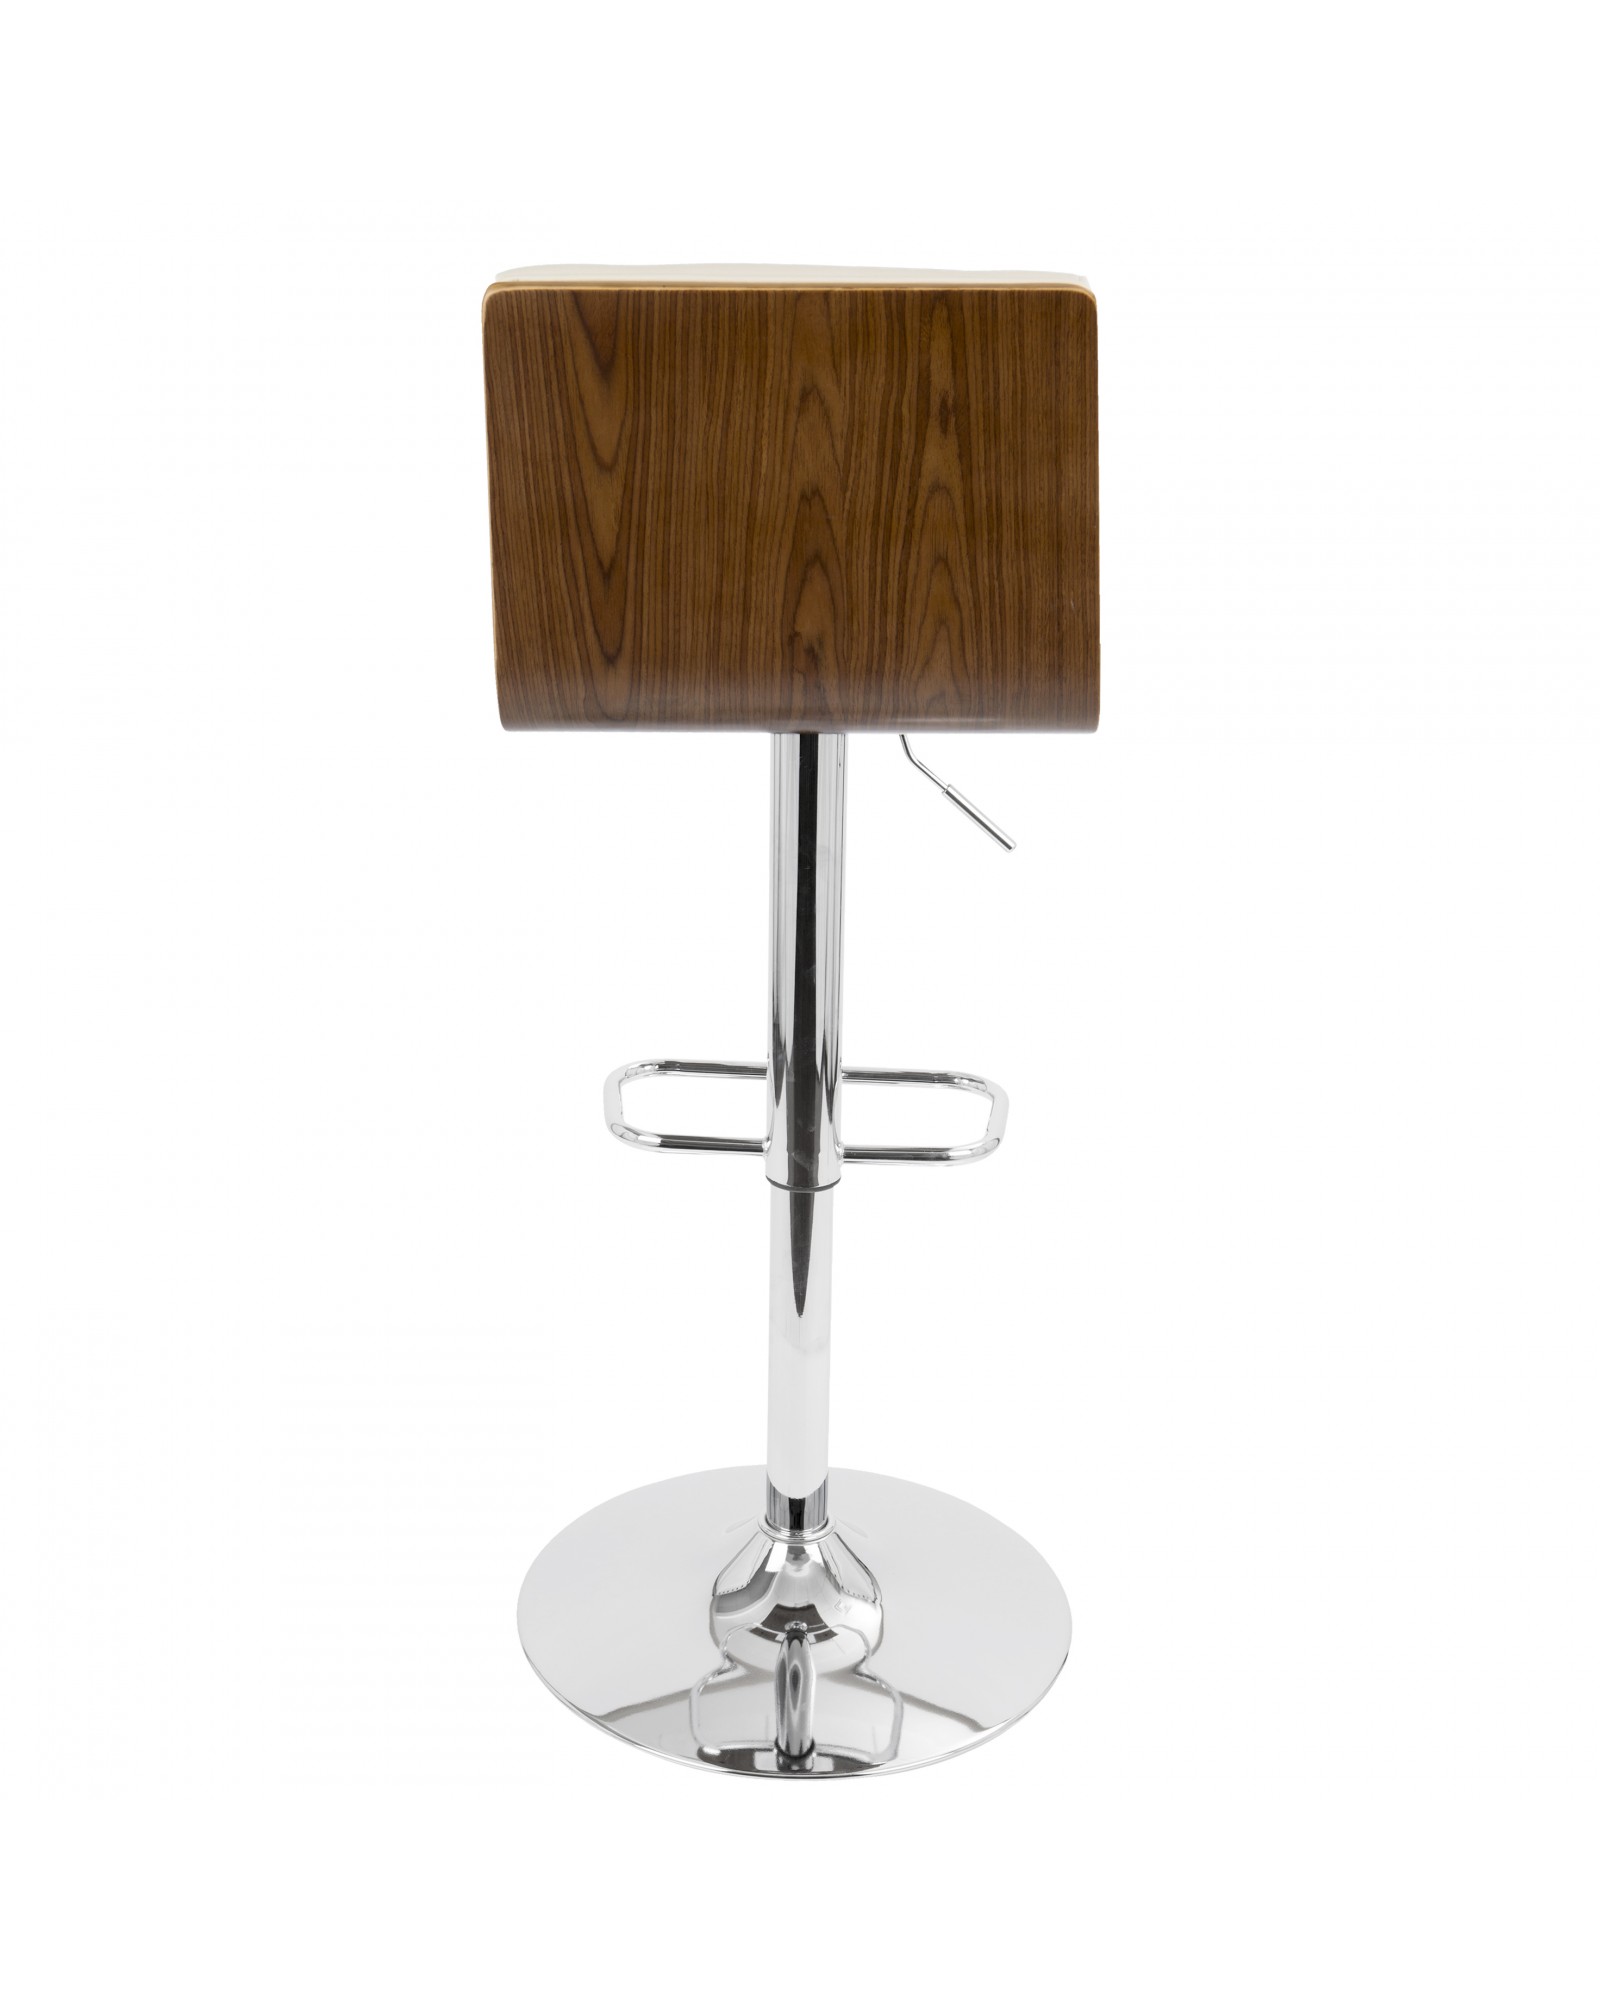 Vasari Mid-Century Modern Adjustable Barstool with Swivel in Walnut and Cream Faux Leather